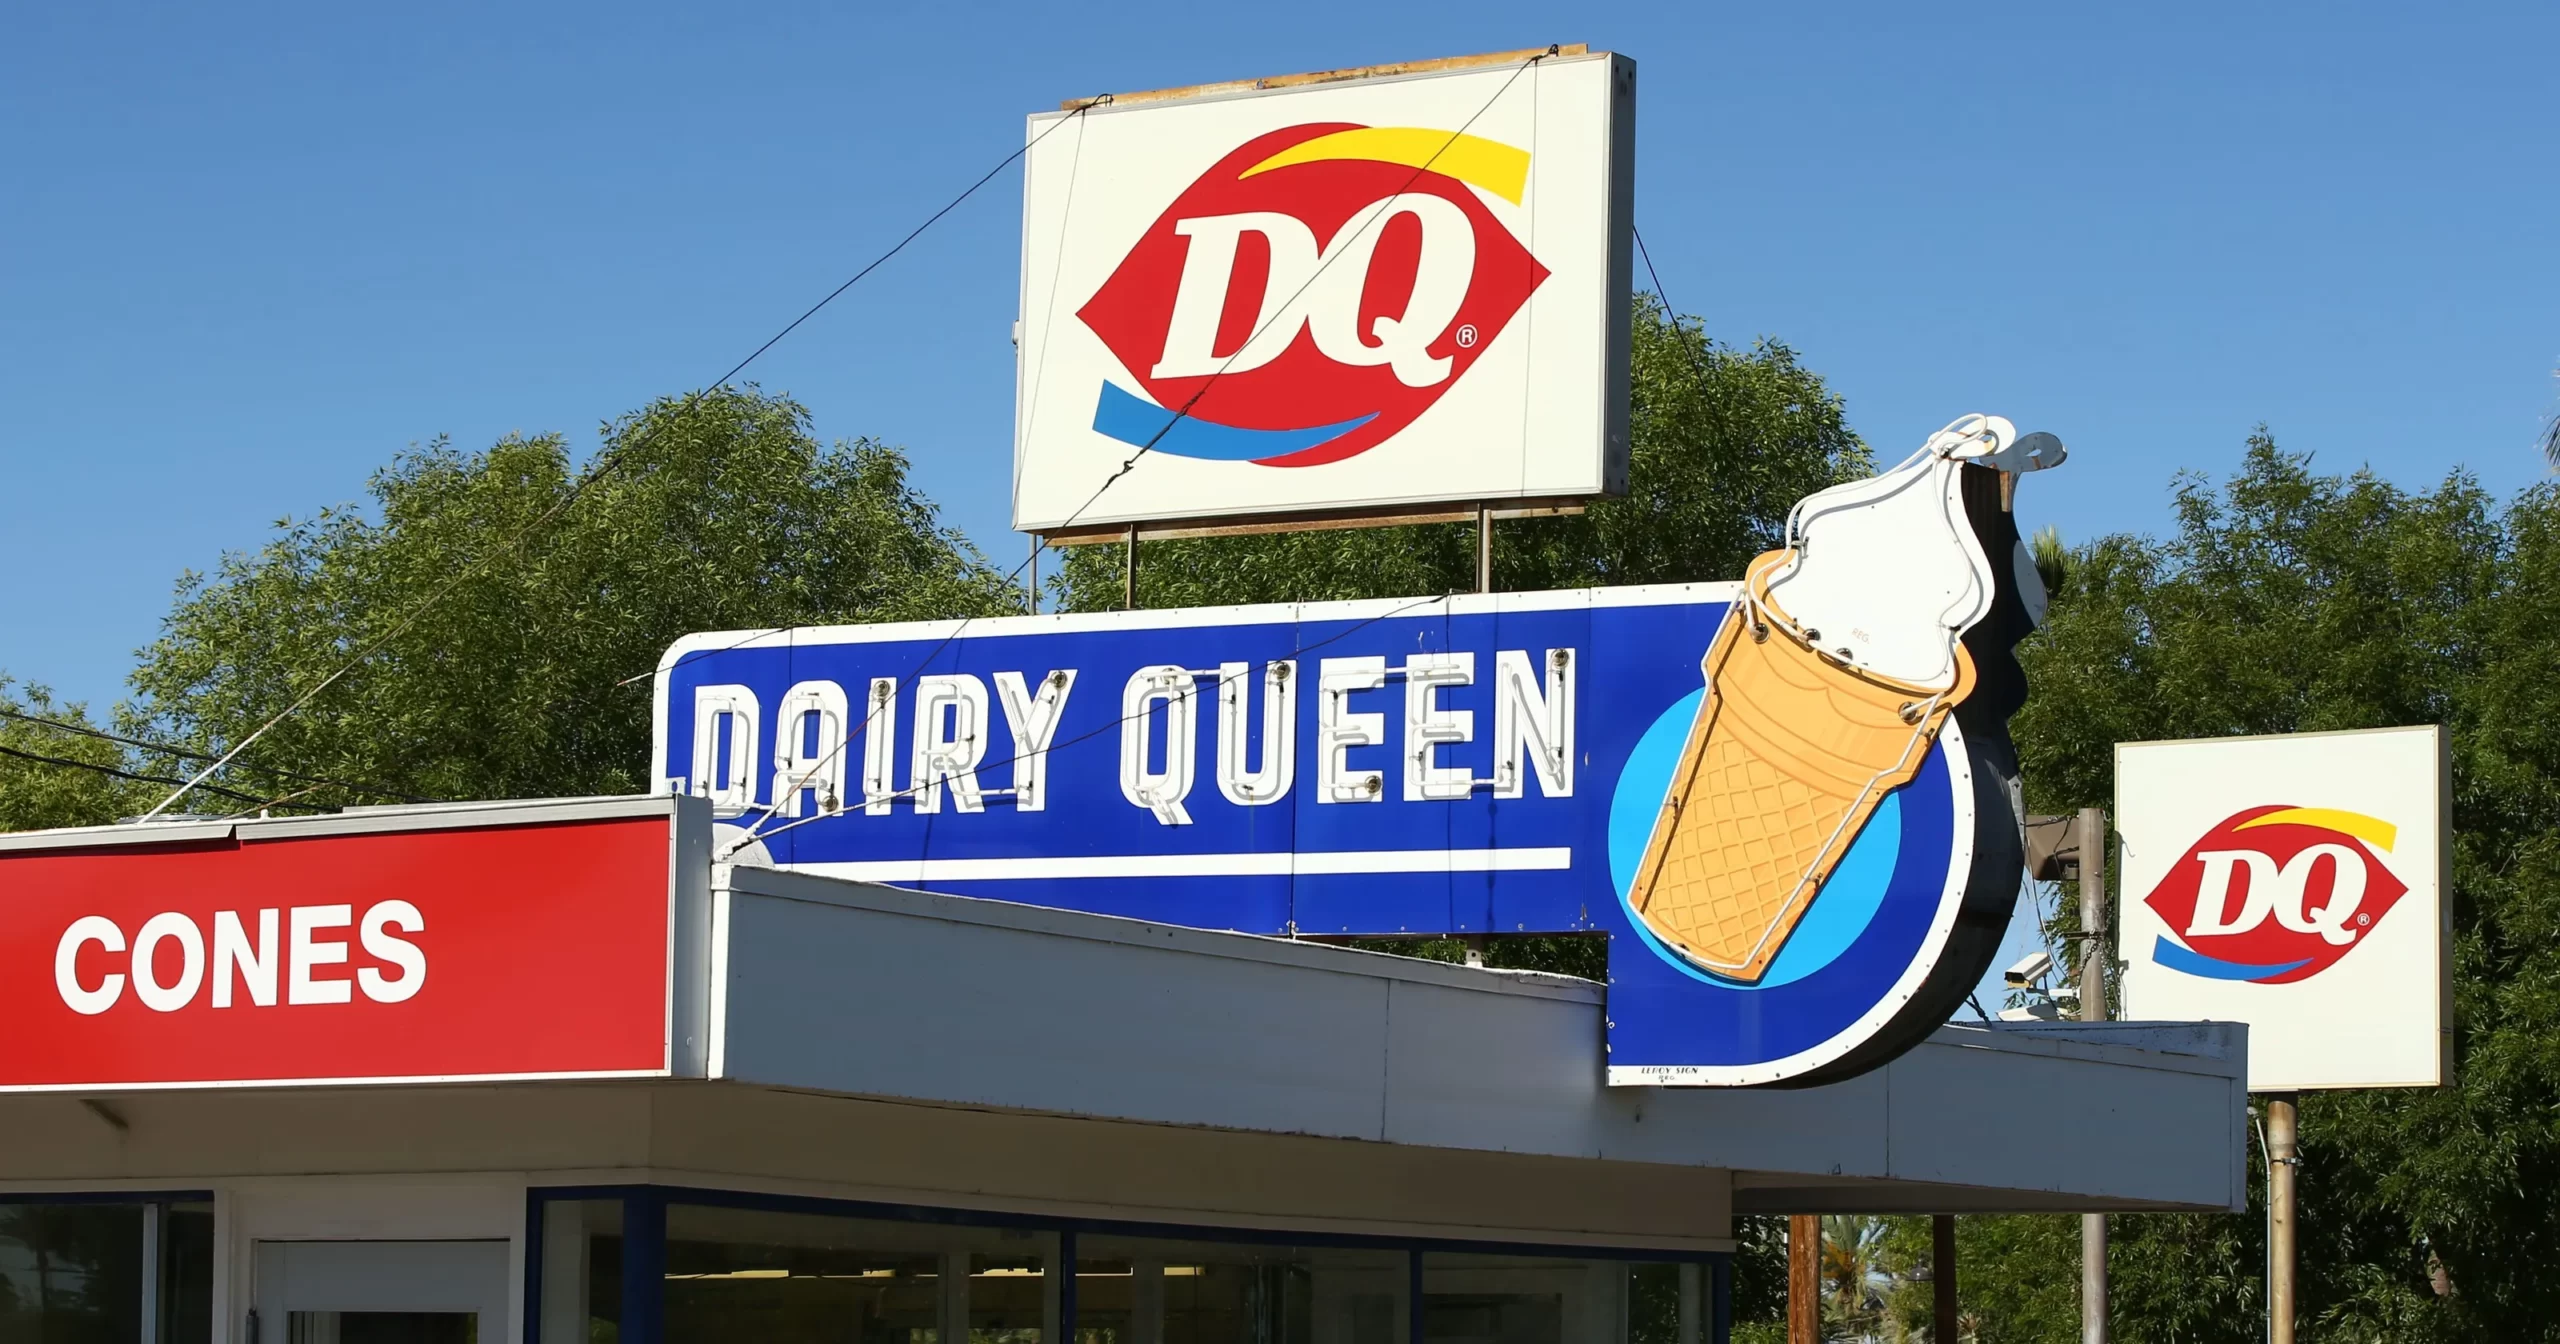 Order Goes South At Dairy Queen; Woman Threatens To ‘Fill Place Up With Bullet Holes’ While Brandishing Pink Pistol